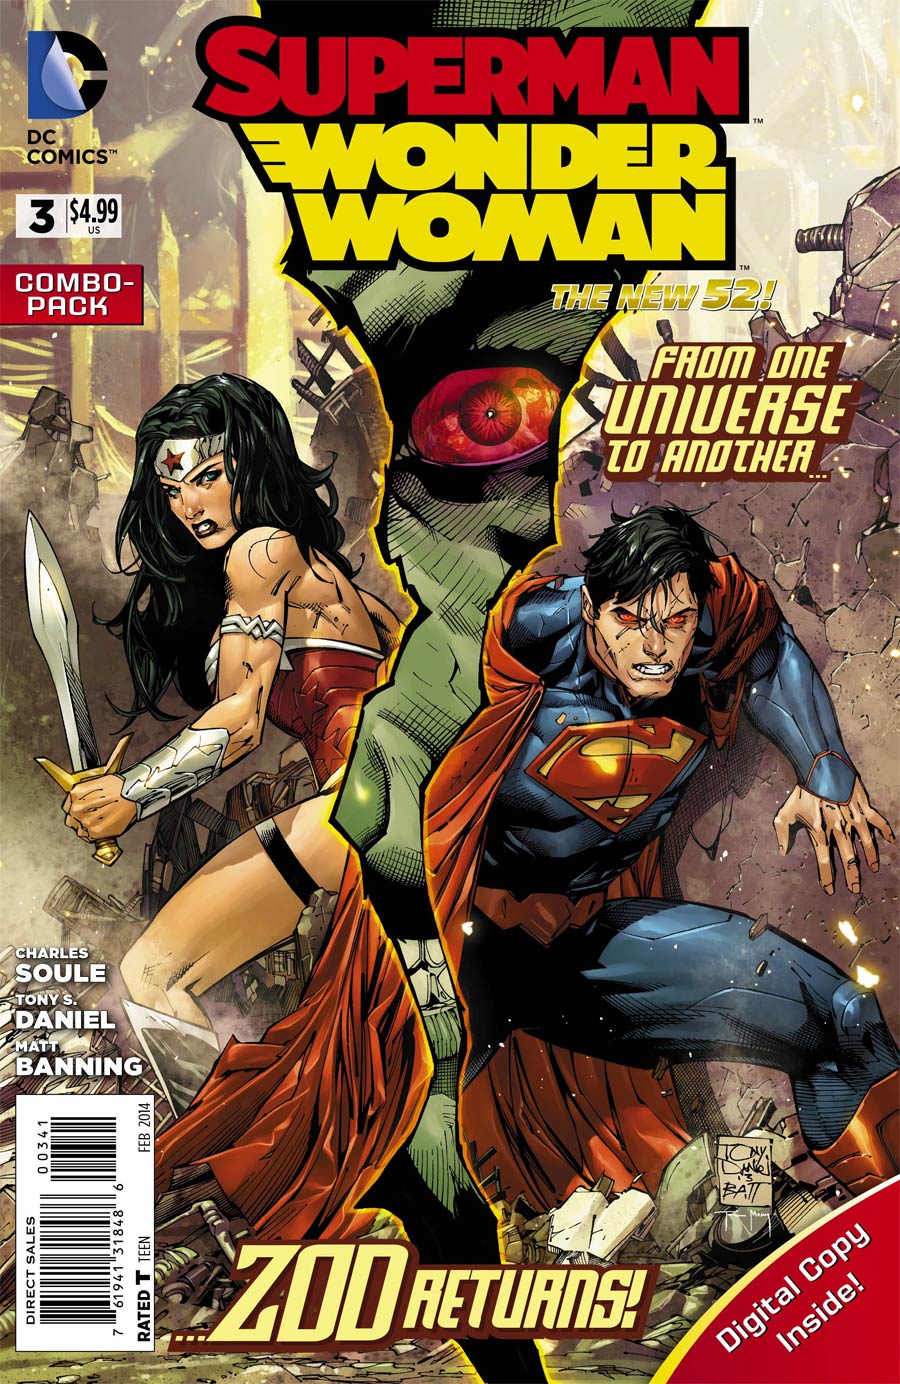 Superman Wonder Woman #3 Cover B Combo Pack With Polybag